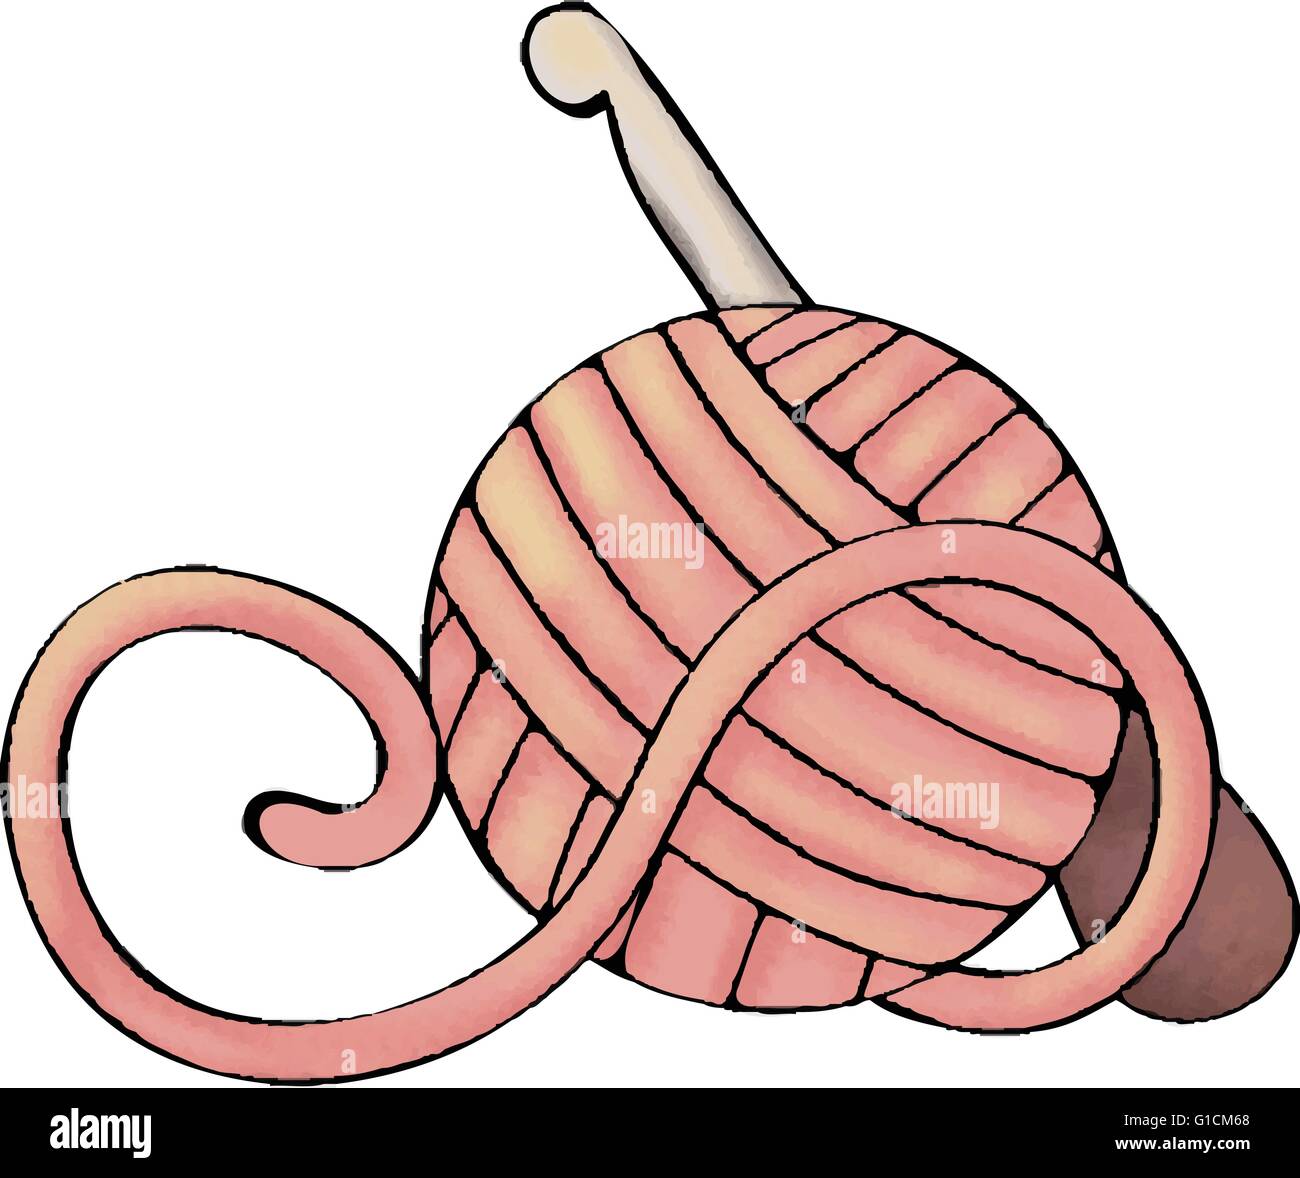 Crochet Hook And Ball Of Yarn Clipart